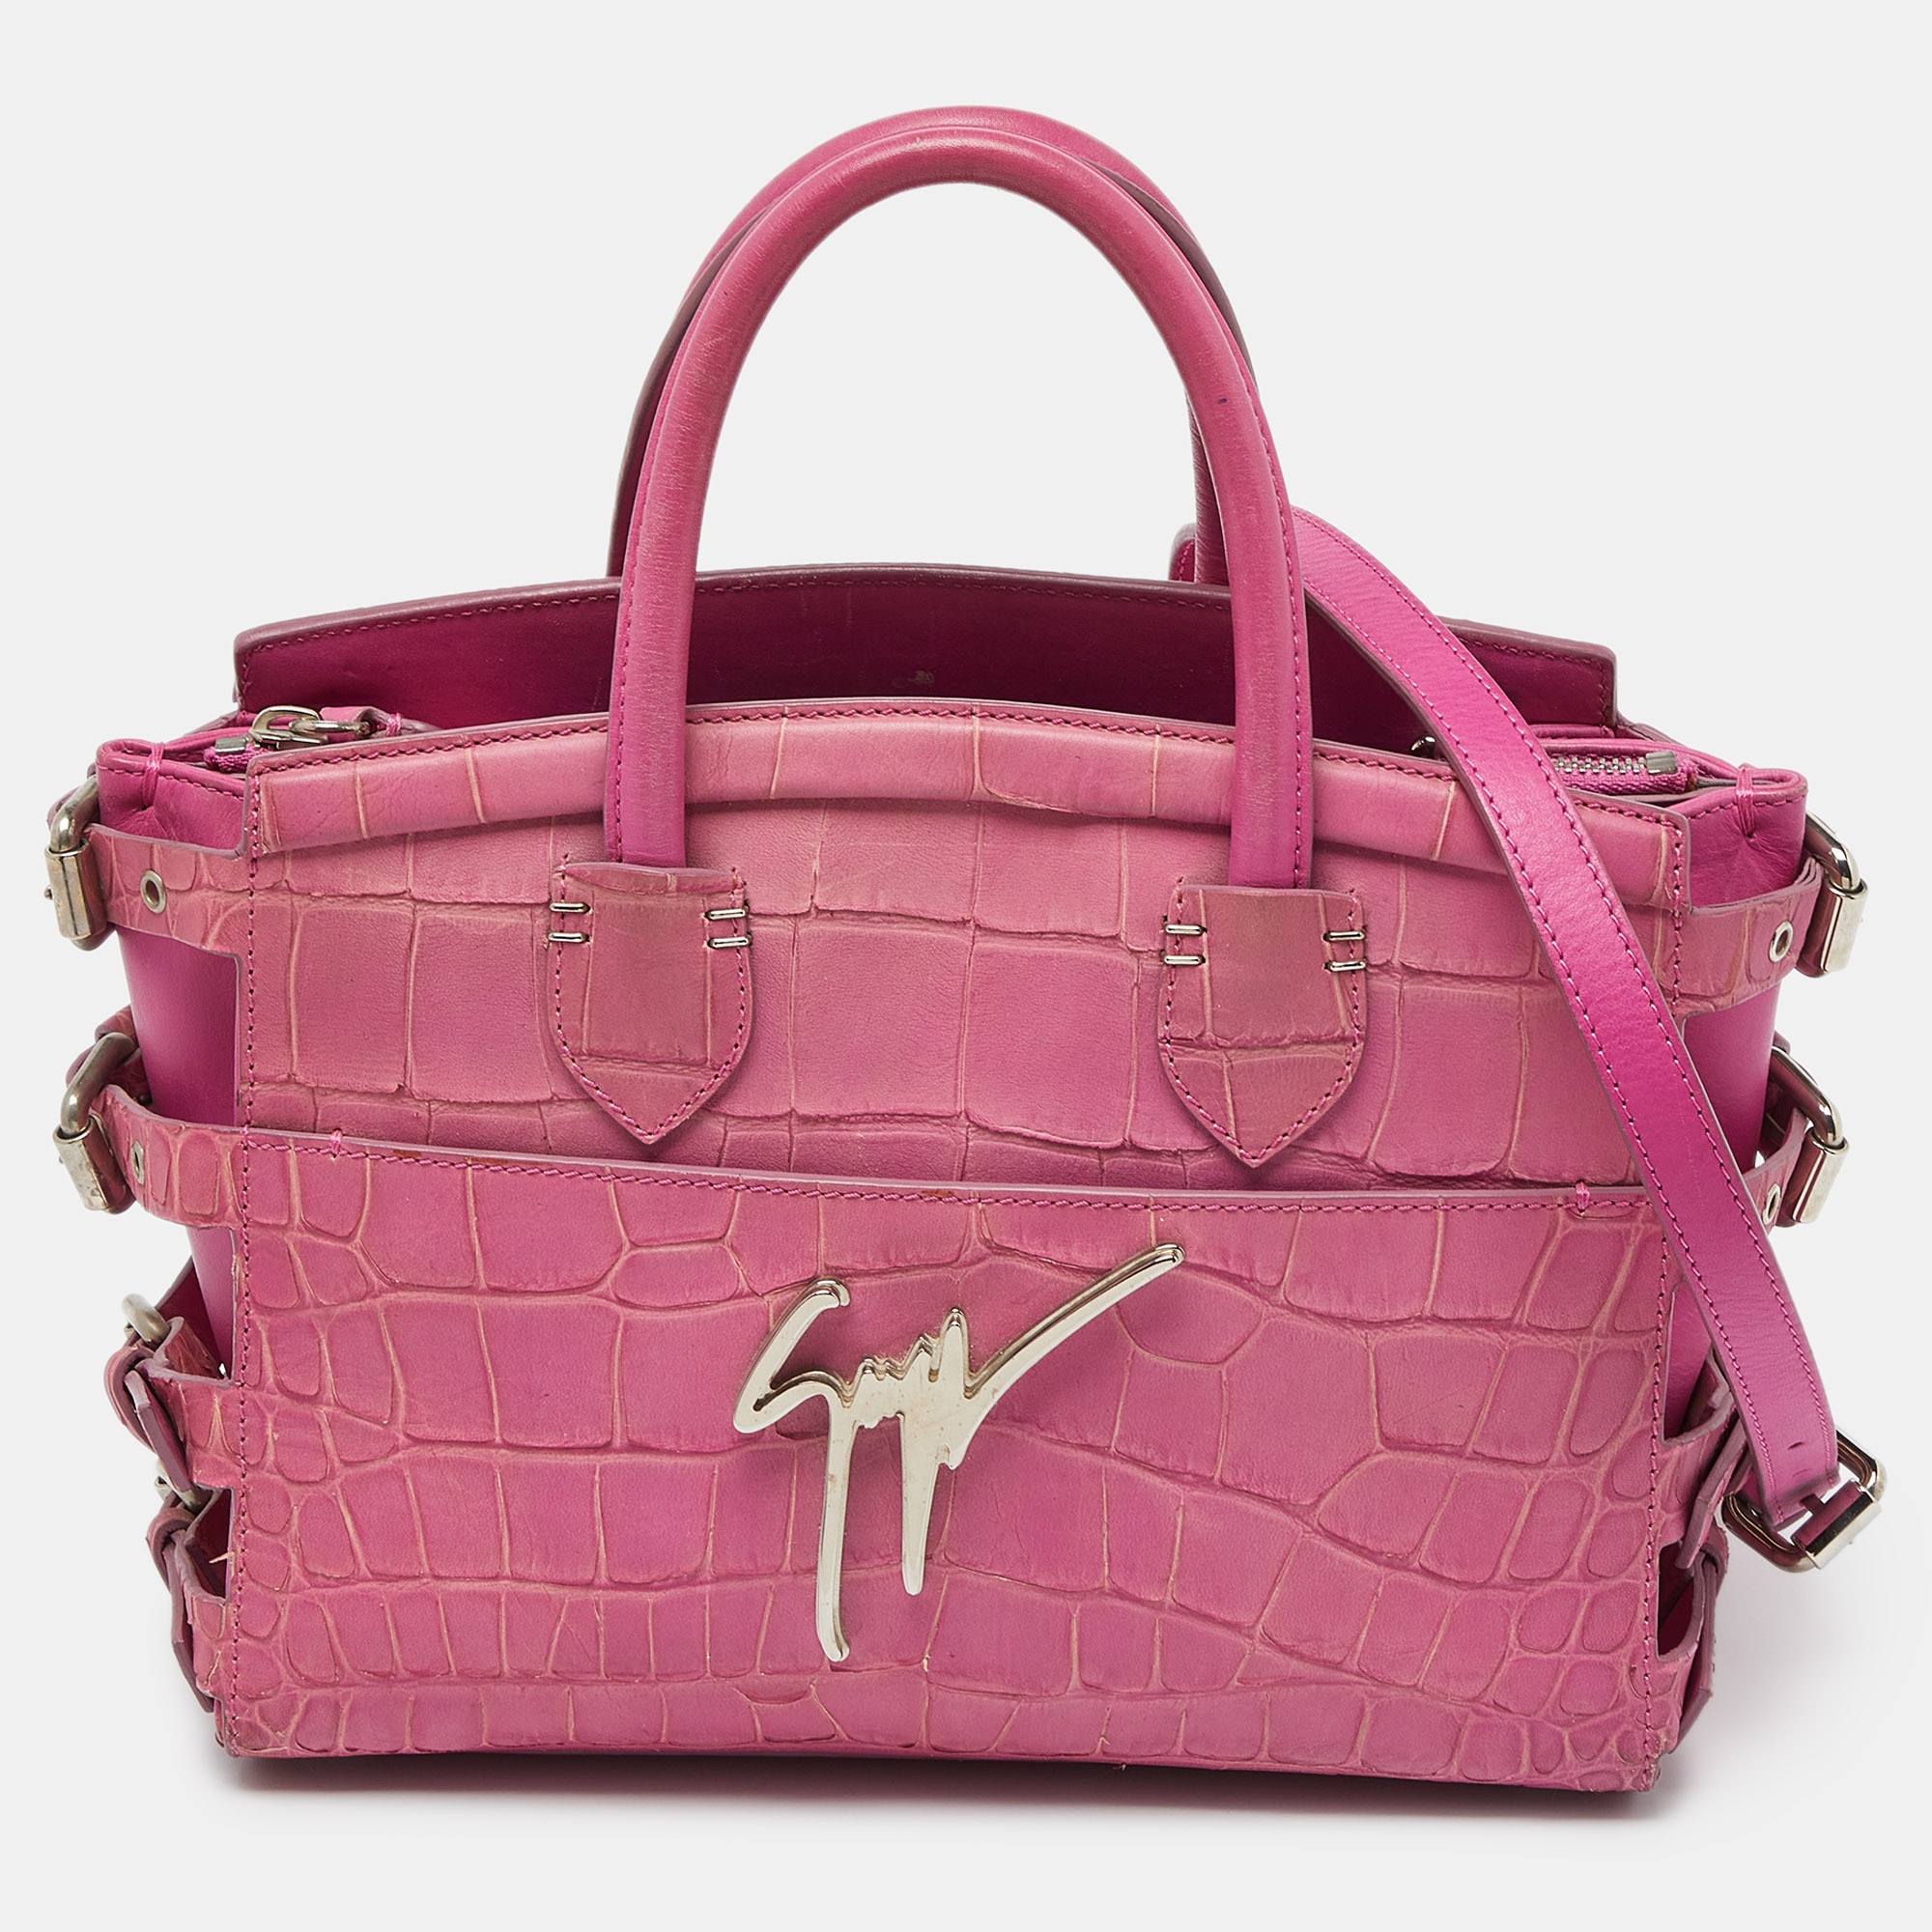 Giuseppe zanotti pink croc embossed leather g17 tote